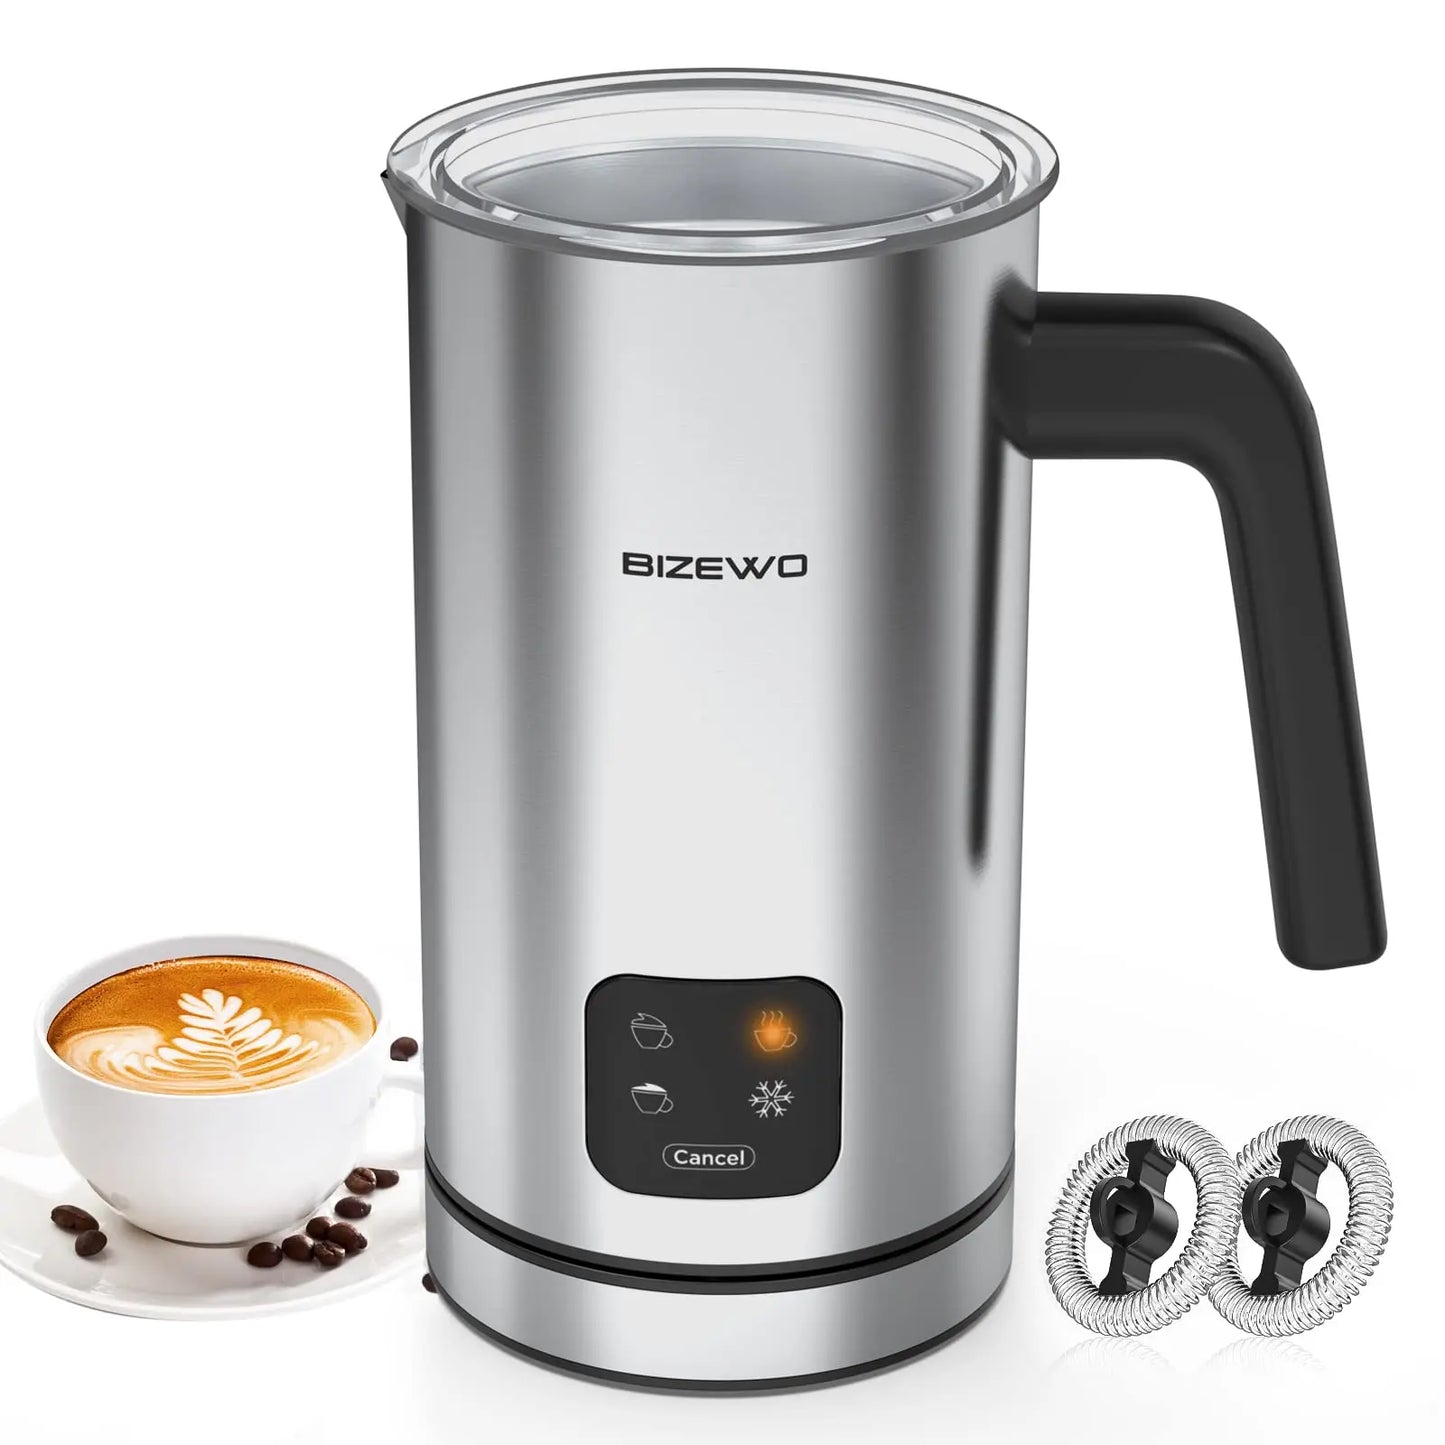 https://bizewohome.com/cdn/shop/files/Milk-Frother-and-Steamer_-Electric-Milk-Warmer-with-Touch-Screen_-BIZEWO-4-IN-1-Automatic-Stainless-Steel-Steamer-for-Coffee-_-Latte_-Hot-Chocolates-BIZEWO-1690162430866_1445x.jpg?v=1690162431